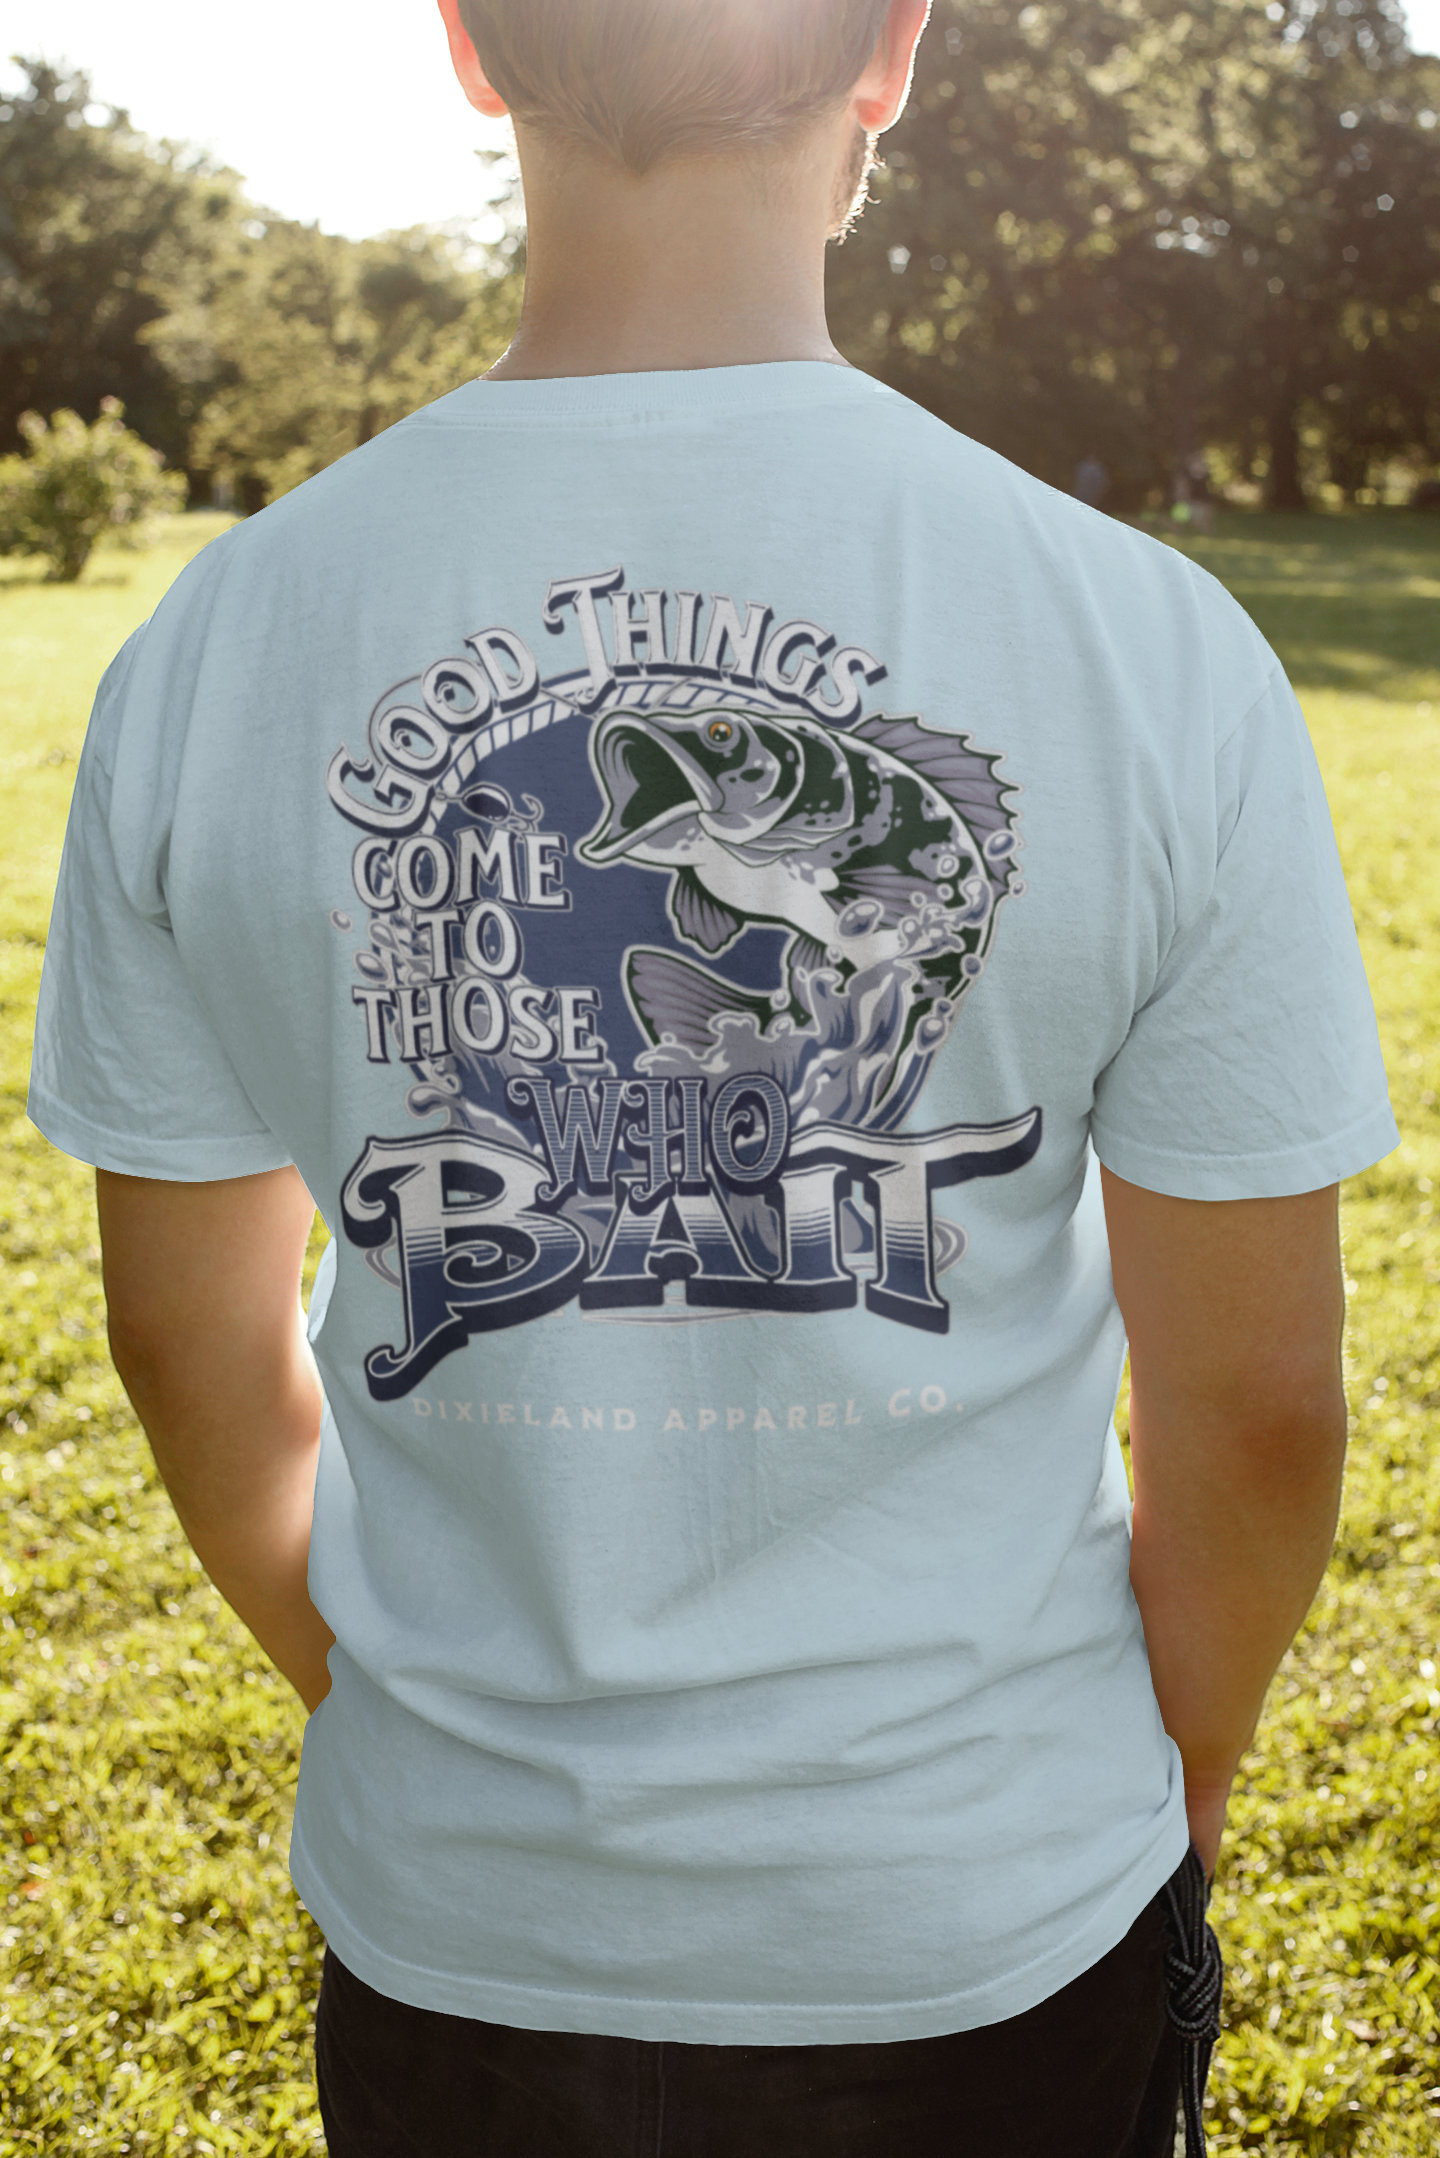 FISHING SHIRT: Good Things Come to Those Who Bait Comfort Colors